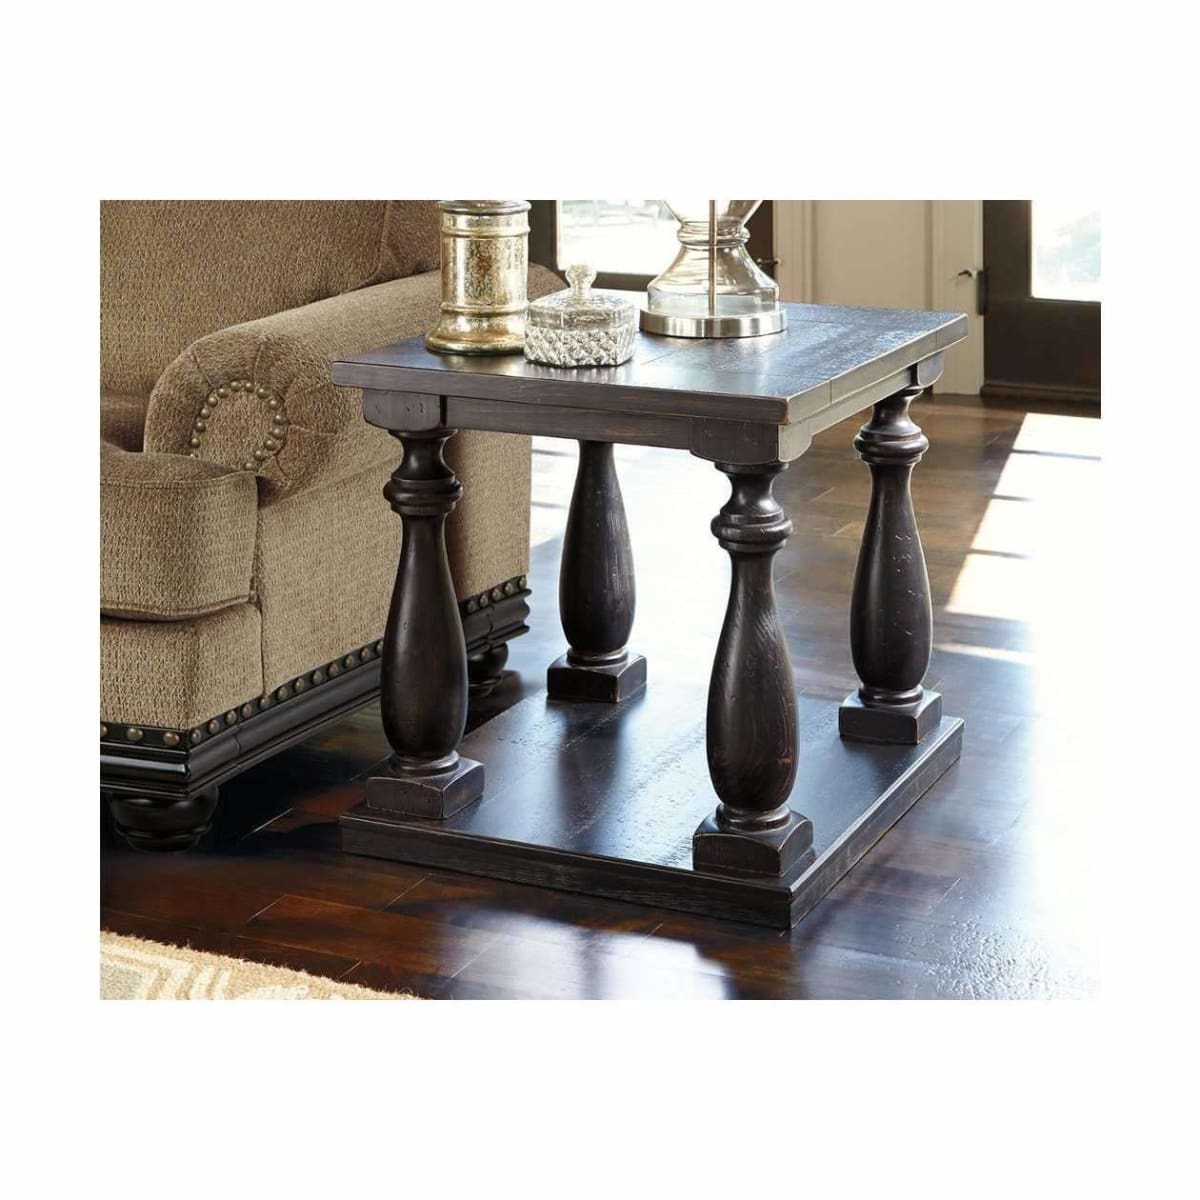 Mallacar End Table - END TABLE/SIDE TABLE